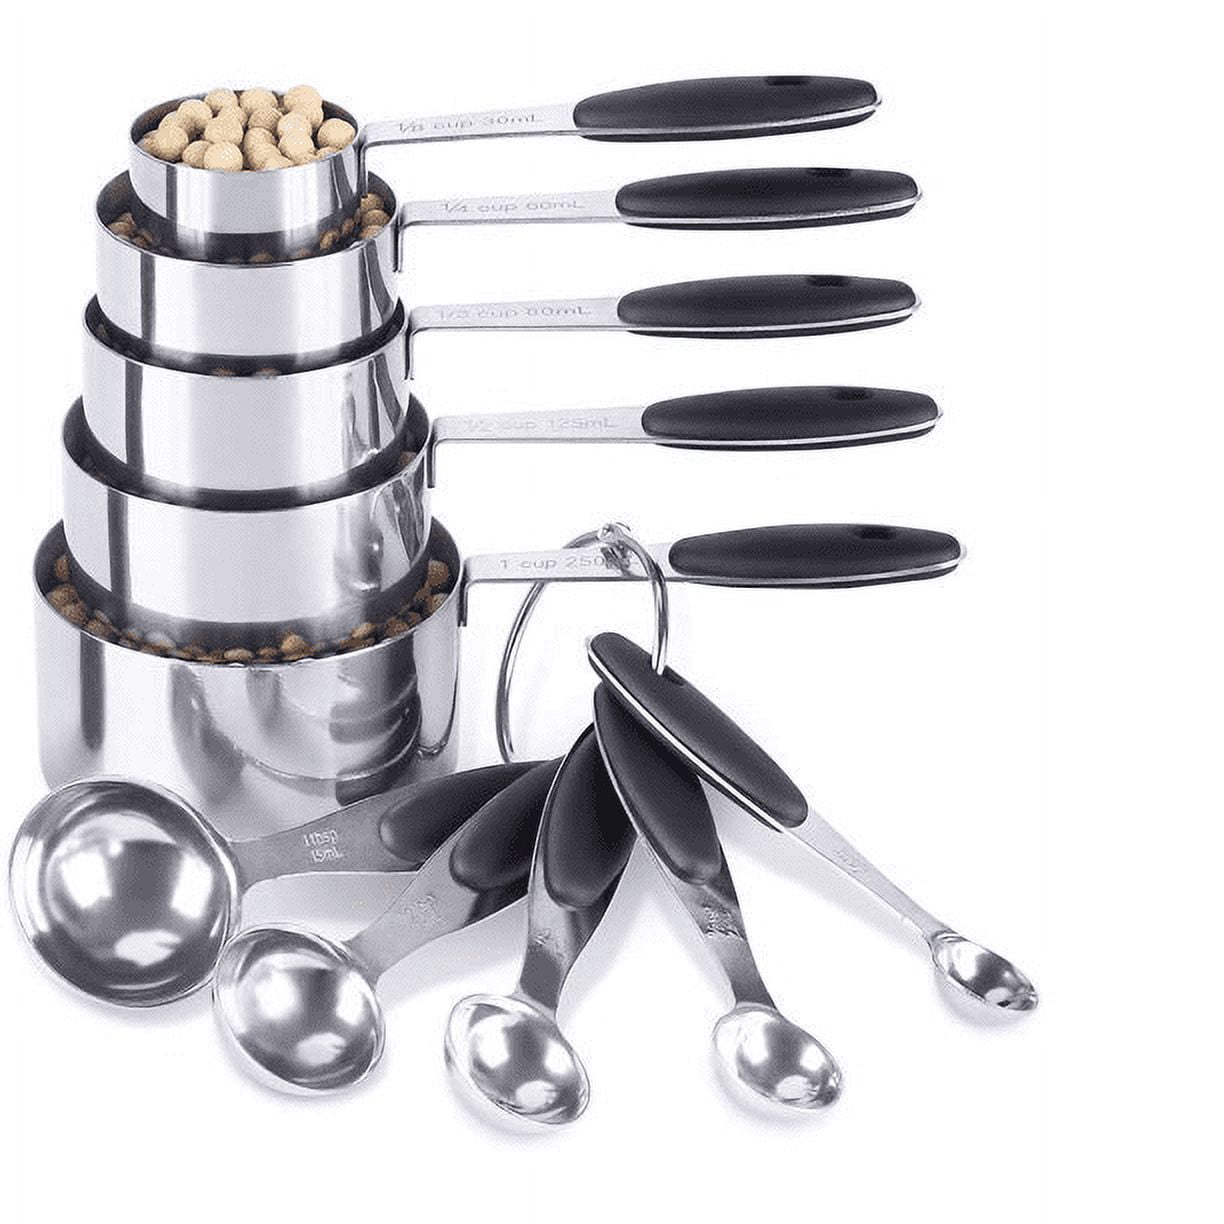 Stainless Steel Silver Measuring Measuring Cups&Spoons Sets for